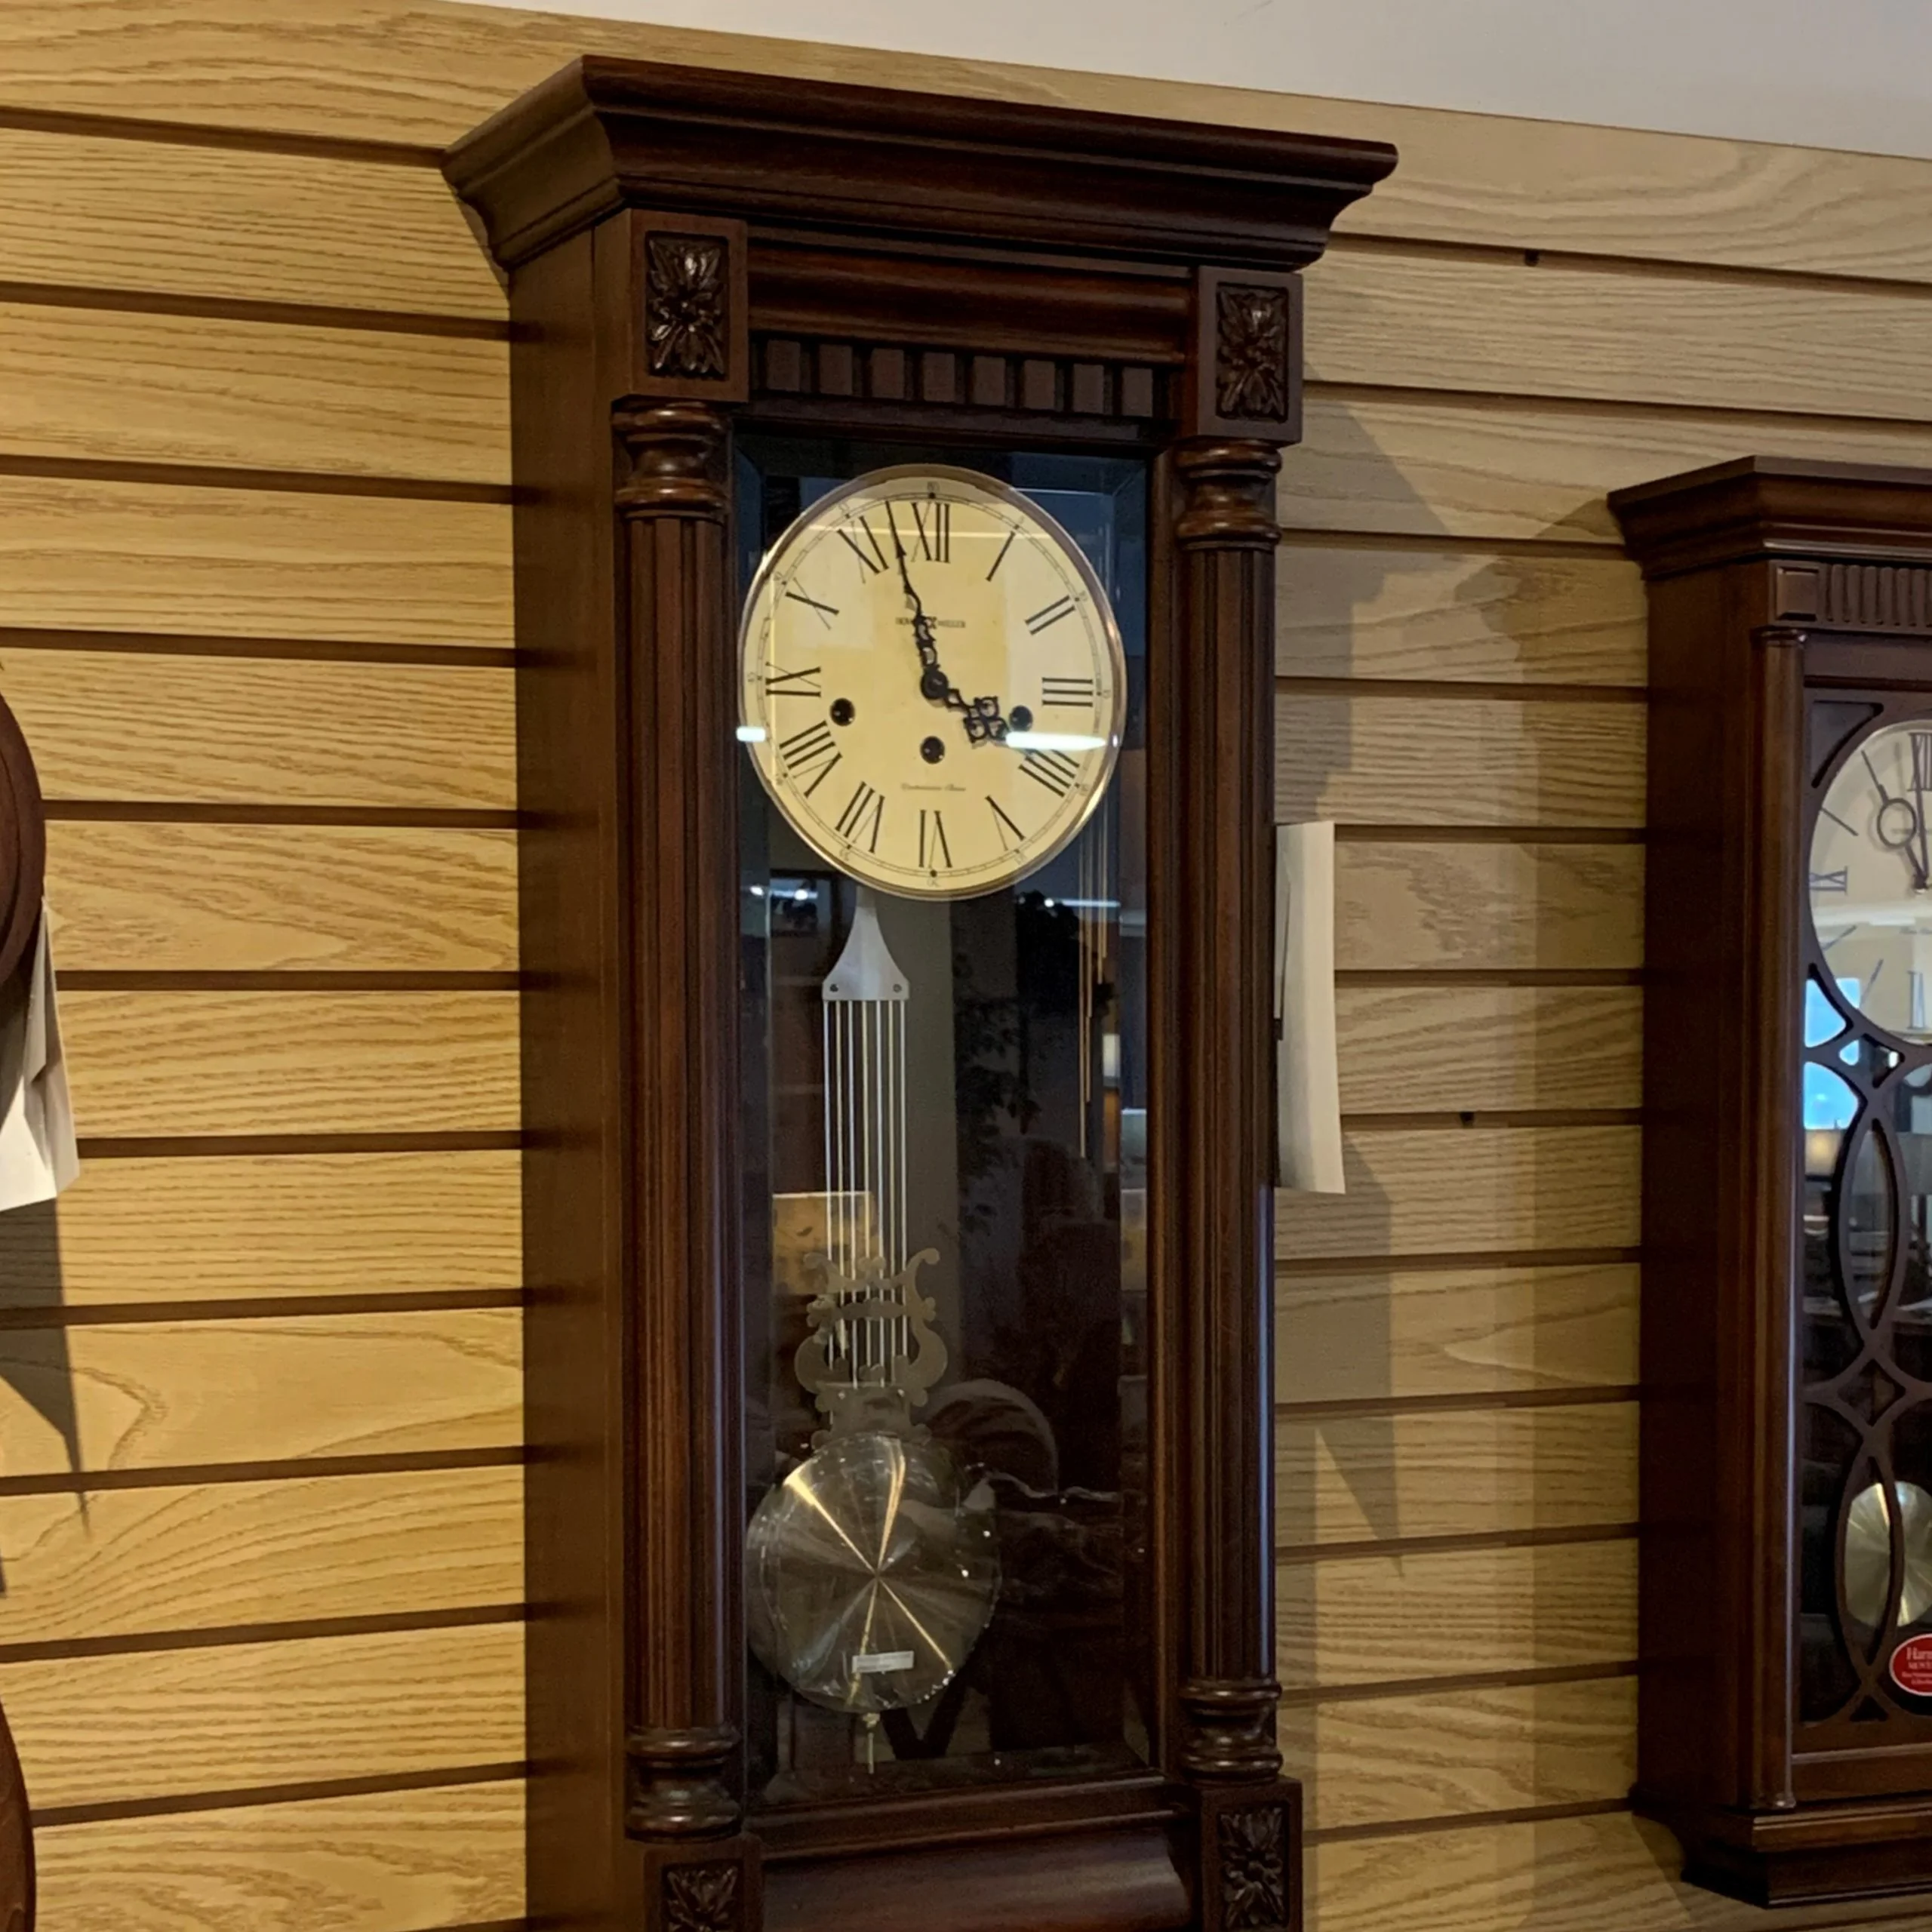 #620-196 Wall clock with solid brass key wind movement & Westminster  chimes, cherry finish, quality built in America by Howard Miller.